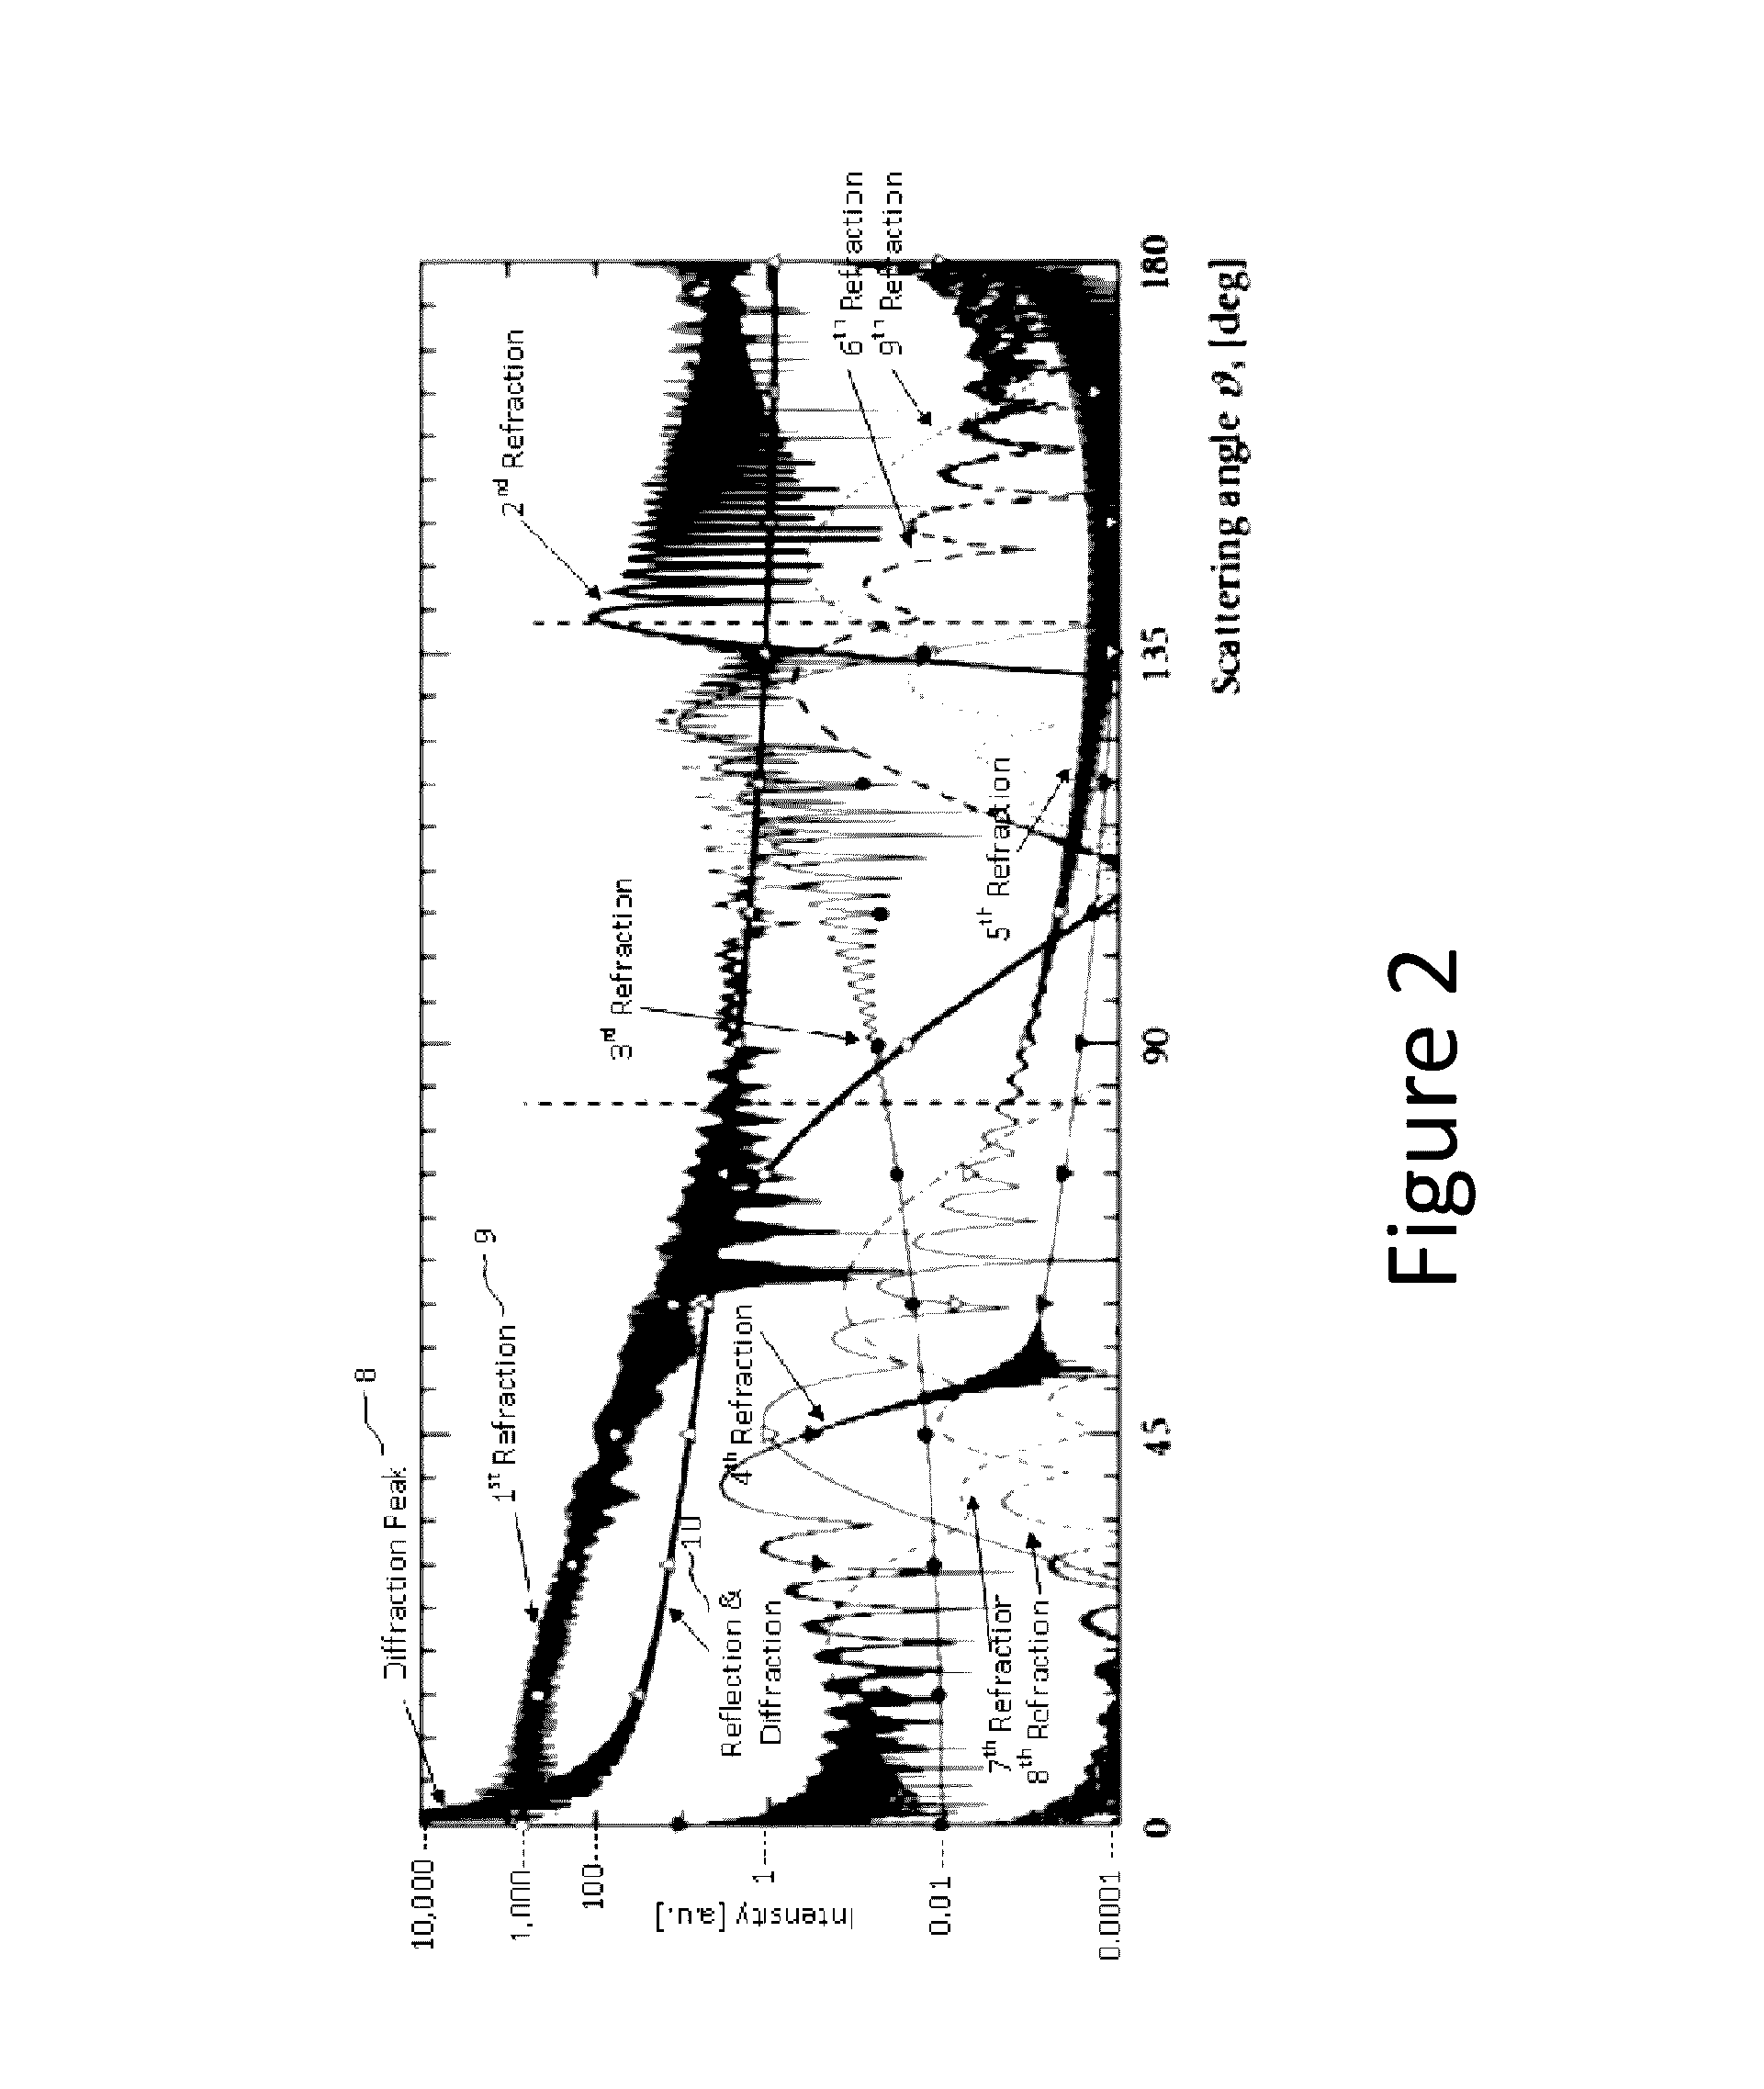 System and method for controlling and measuring steam